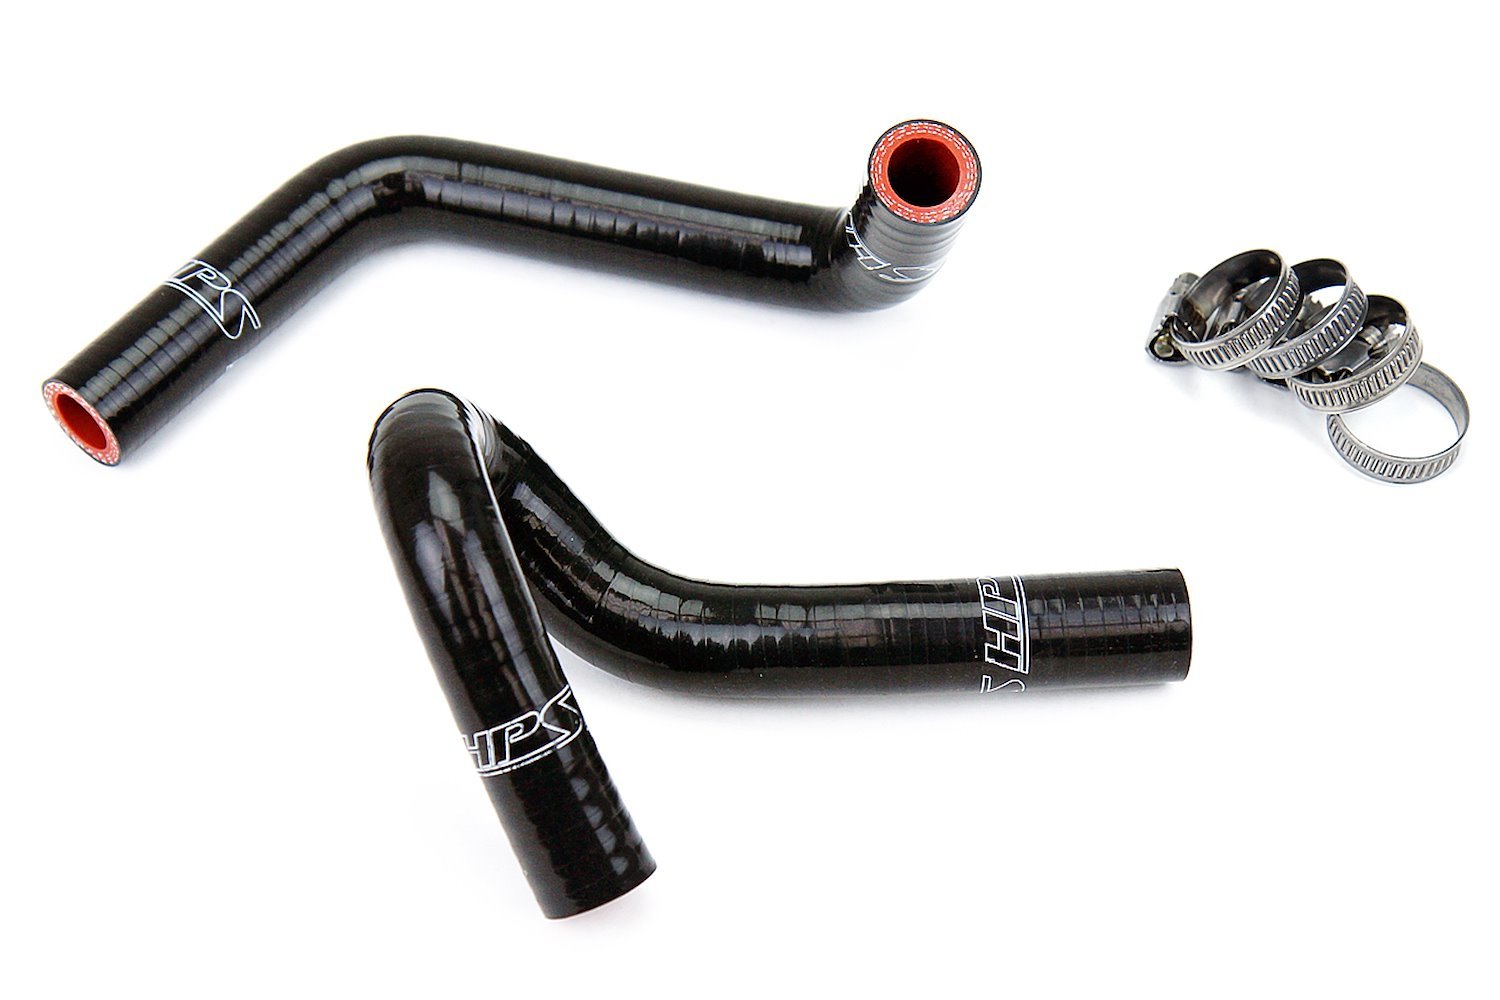 57-1310-BLK Heater Hose Kit, High-Temp 3-Ply Reinforced Silicone, Replace OEM Rubber Heater Coolant Hoses